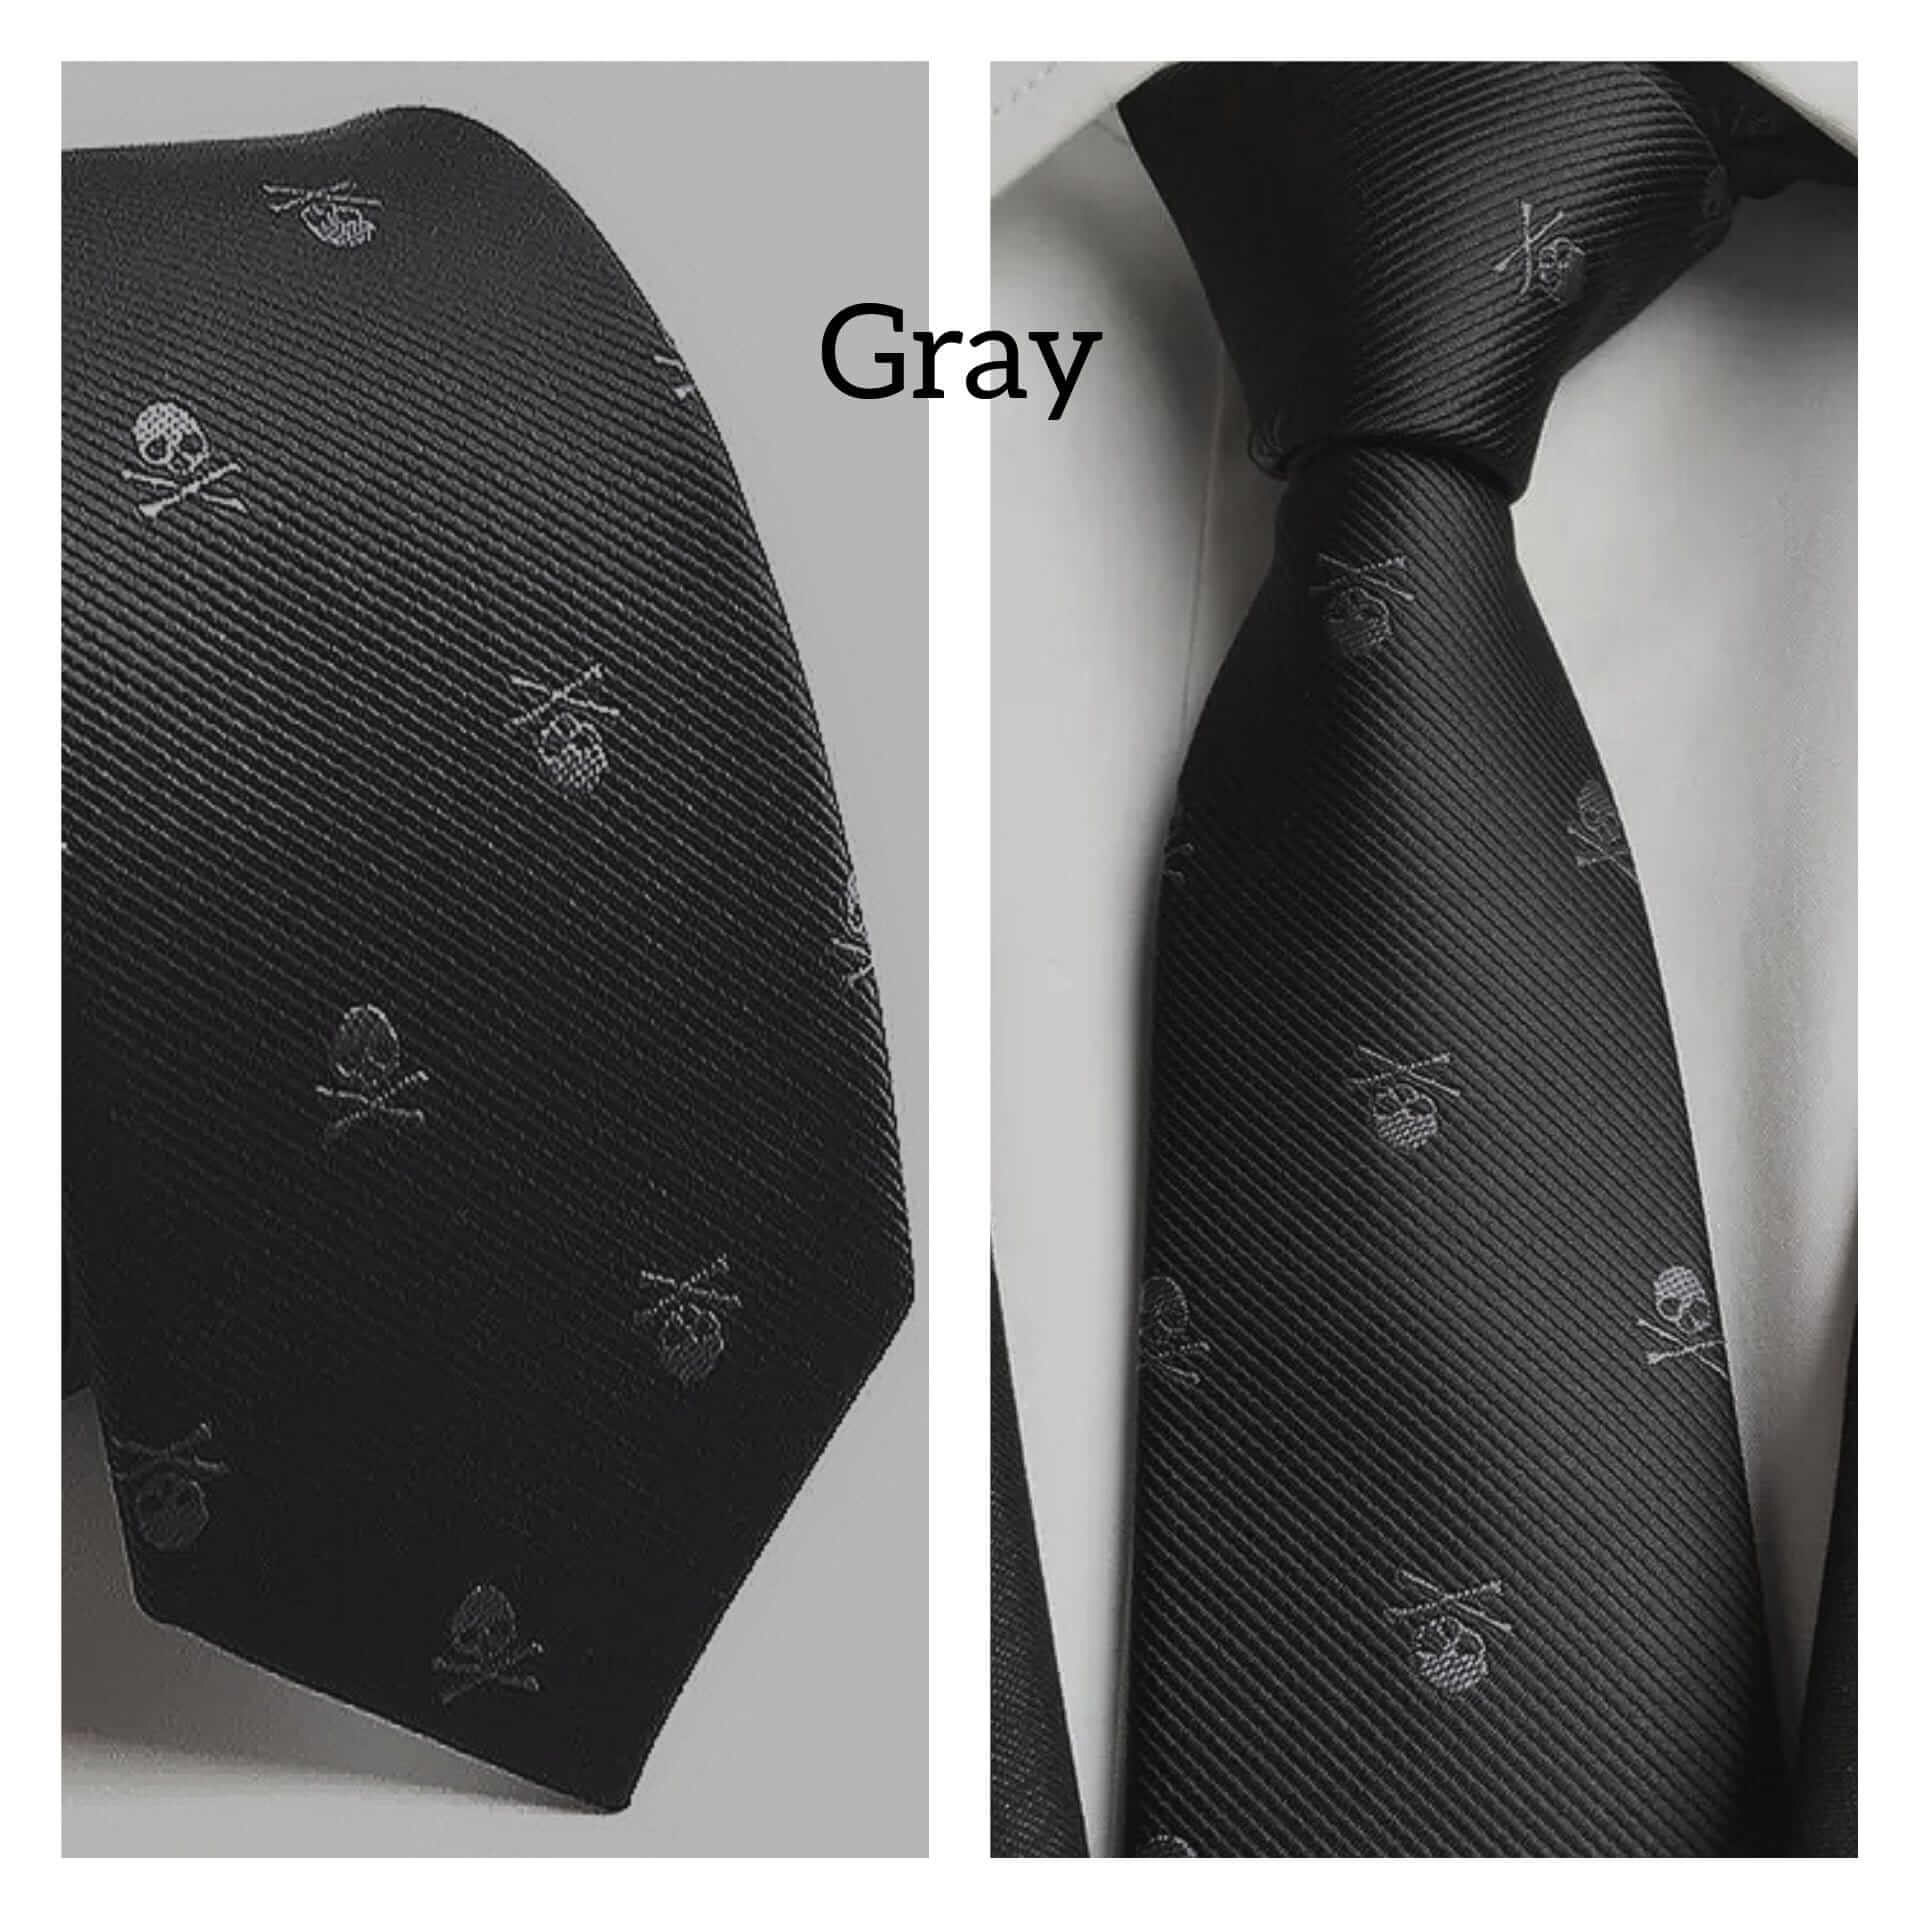 Skull Embroidered Silk Necktie Jacquard Woven High Quality - Guiding Lights Boutique